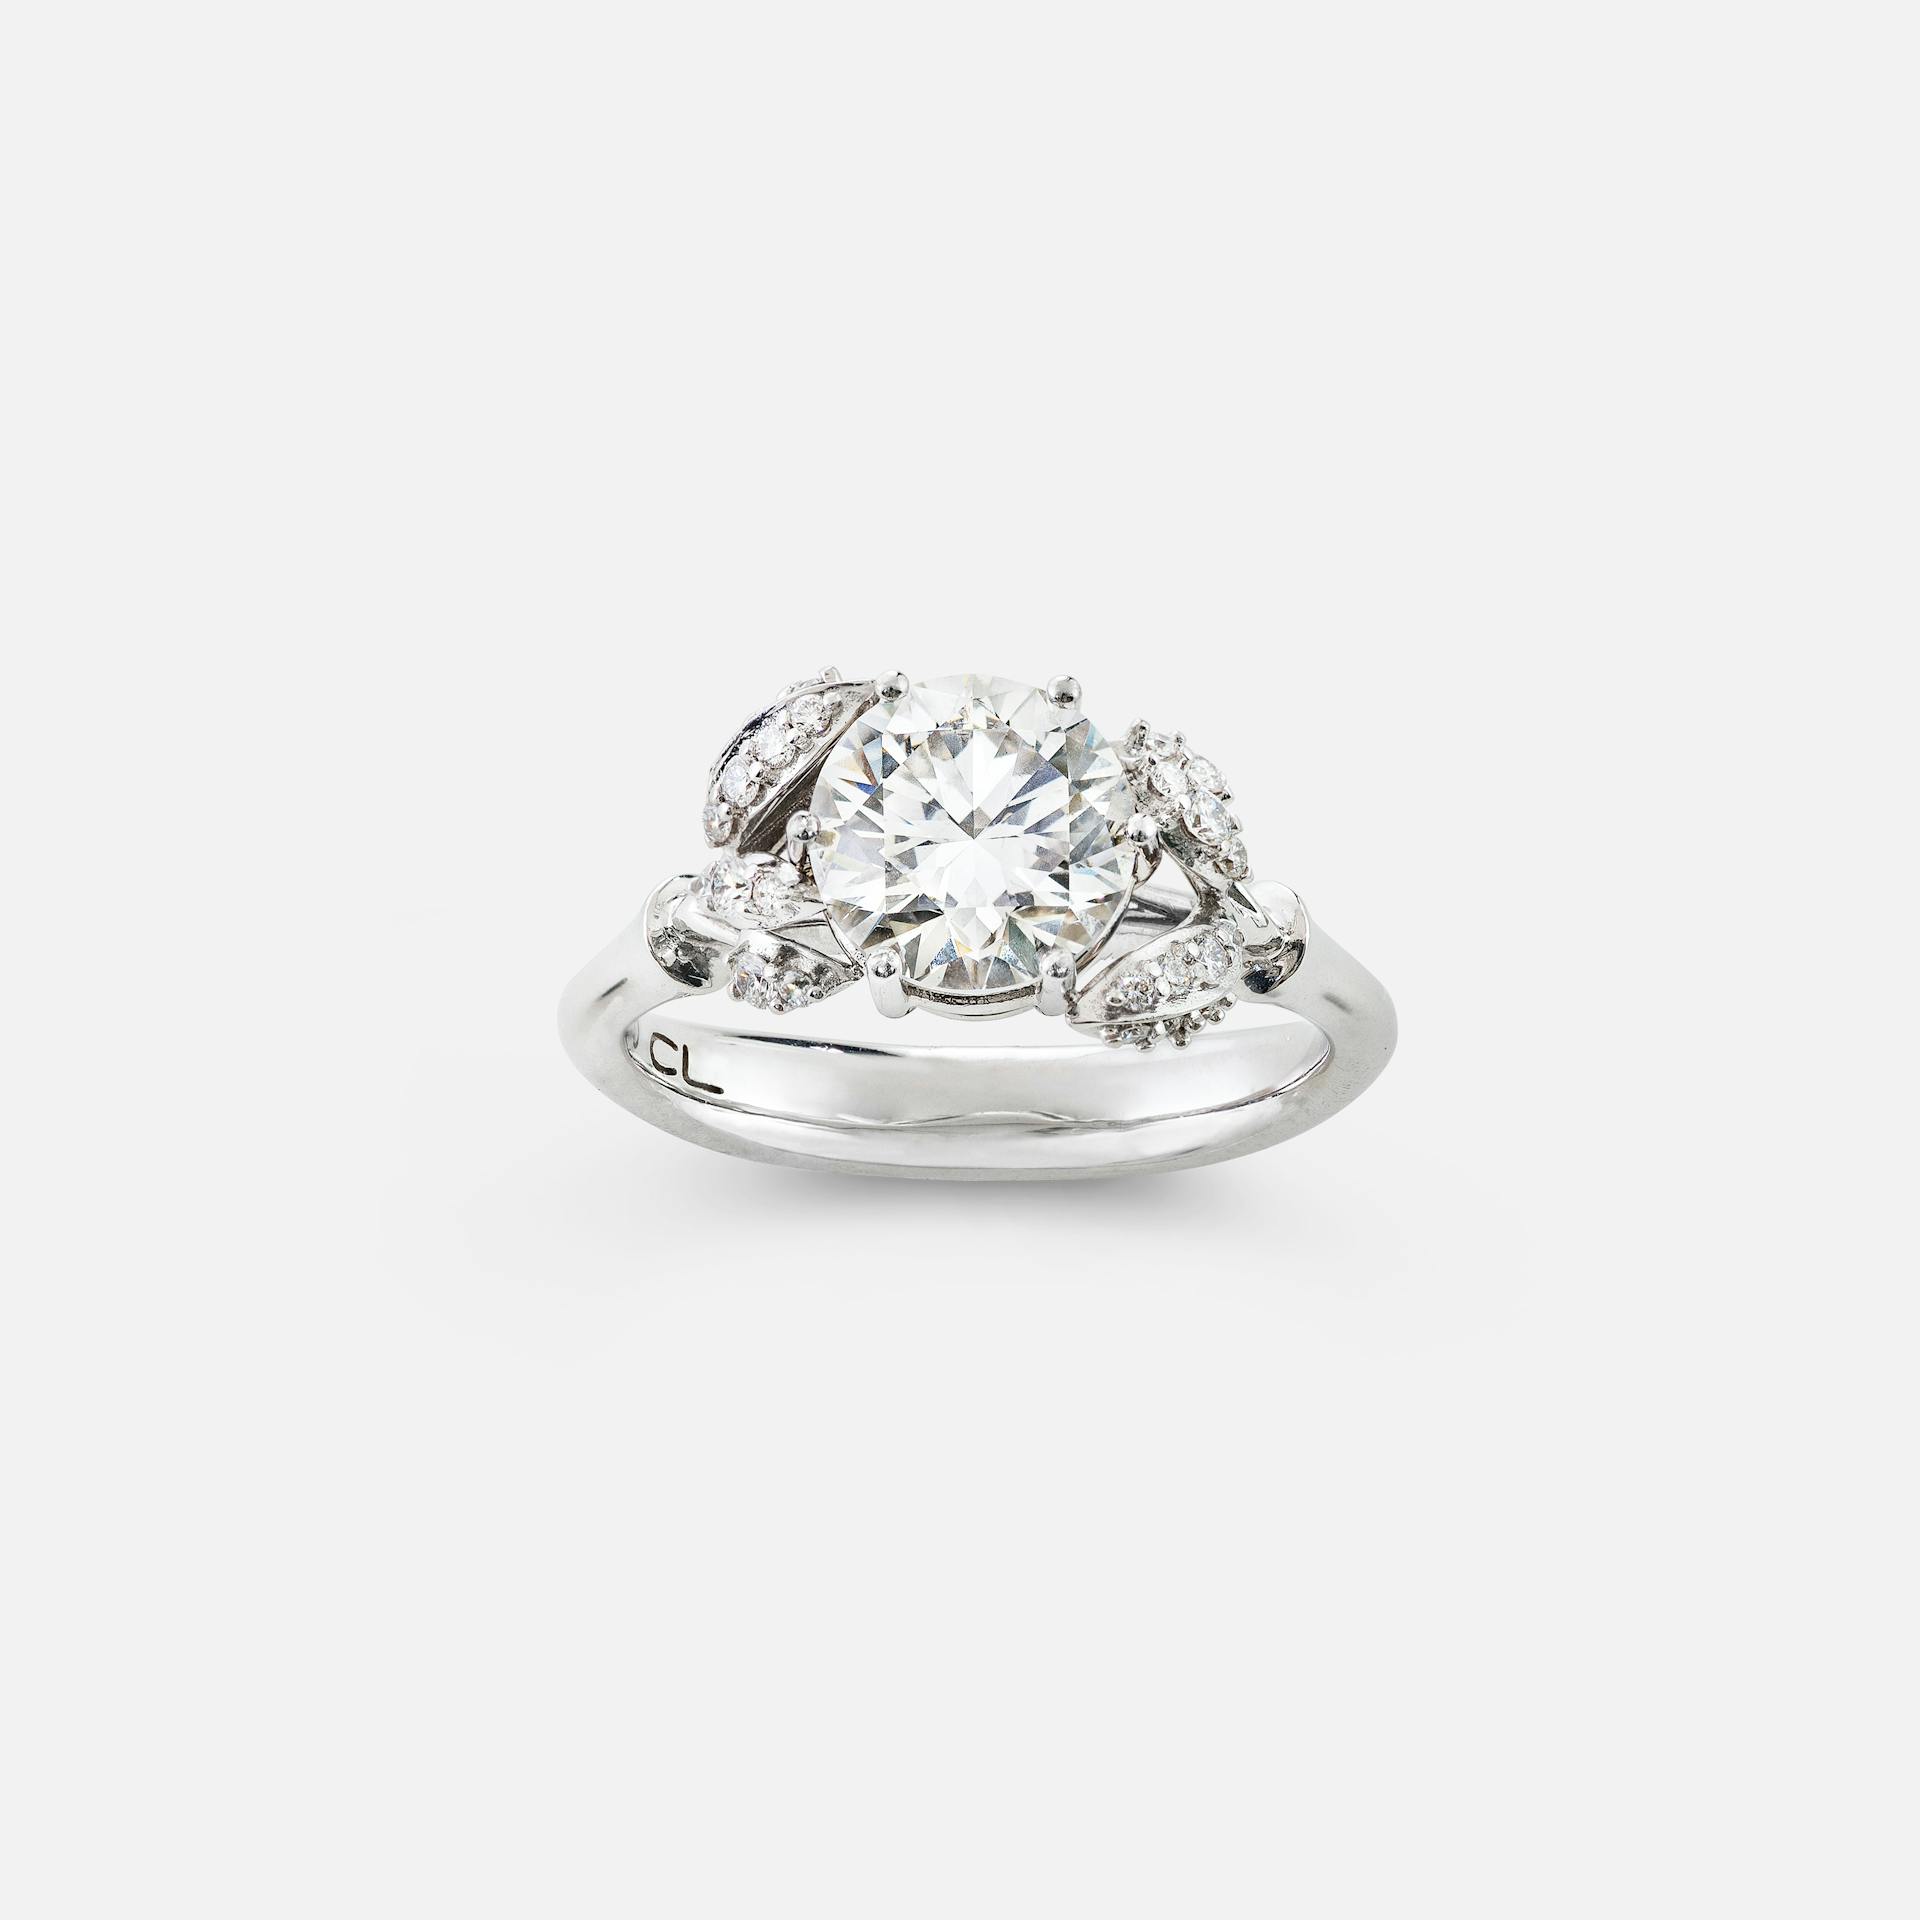 Winter Frost solitaire ring